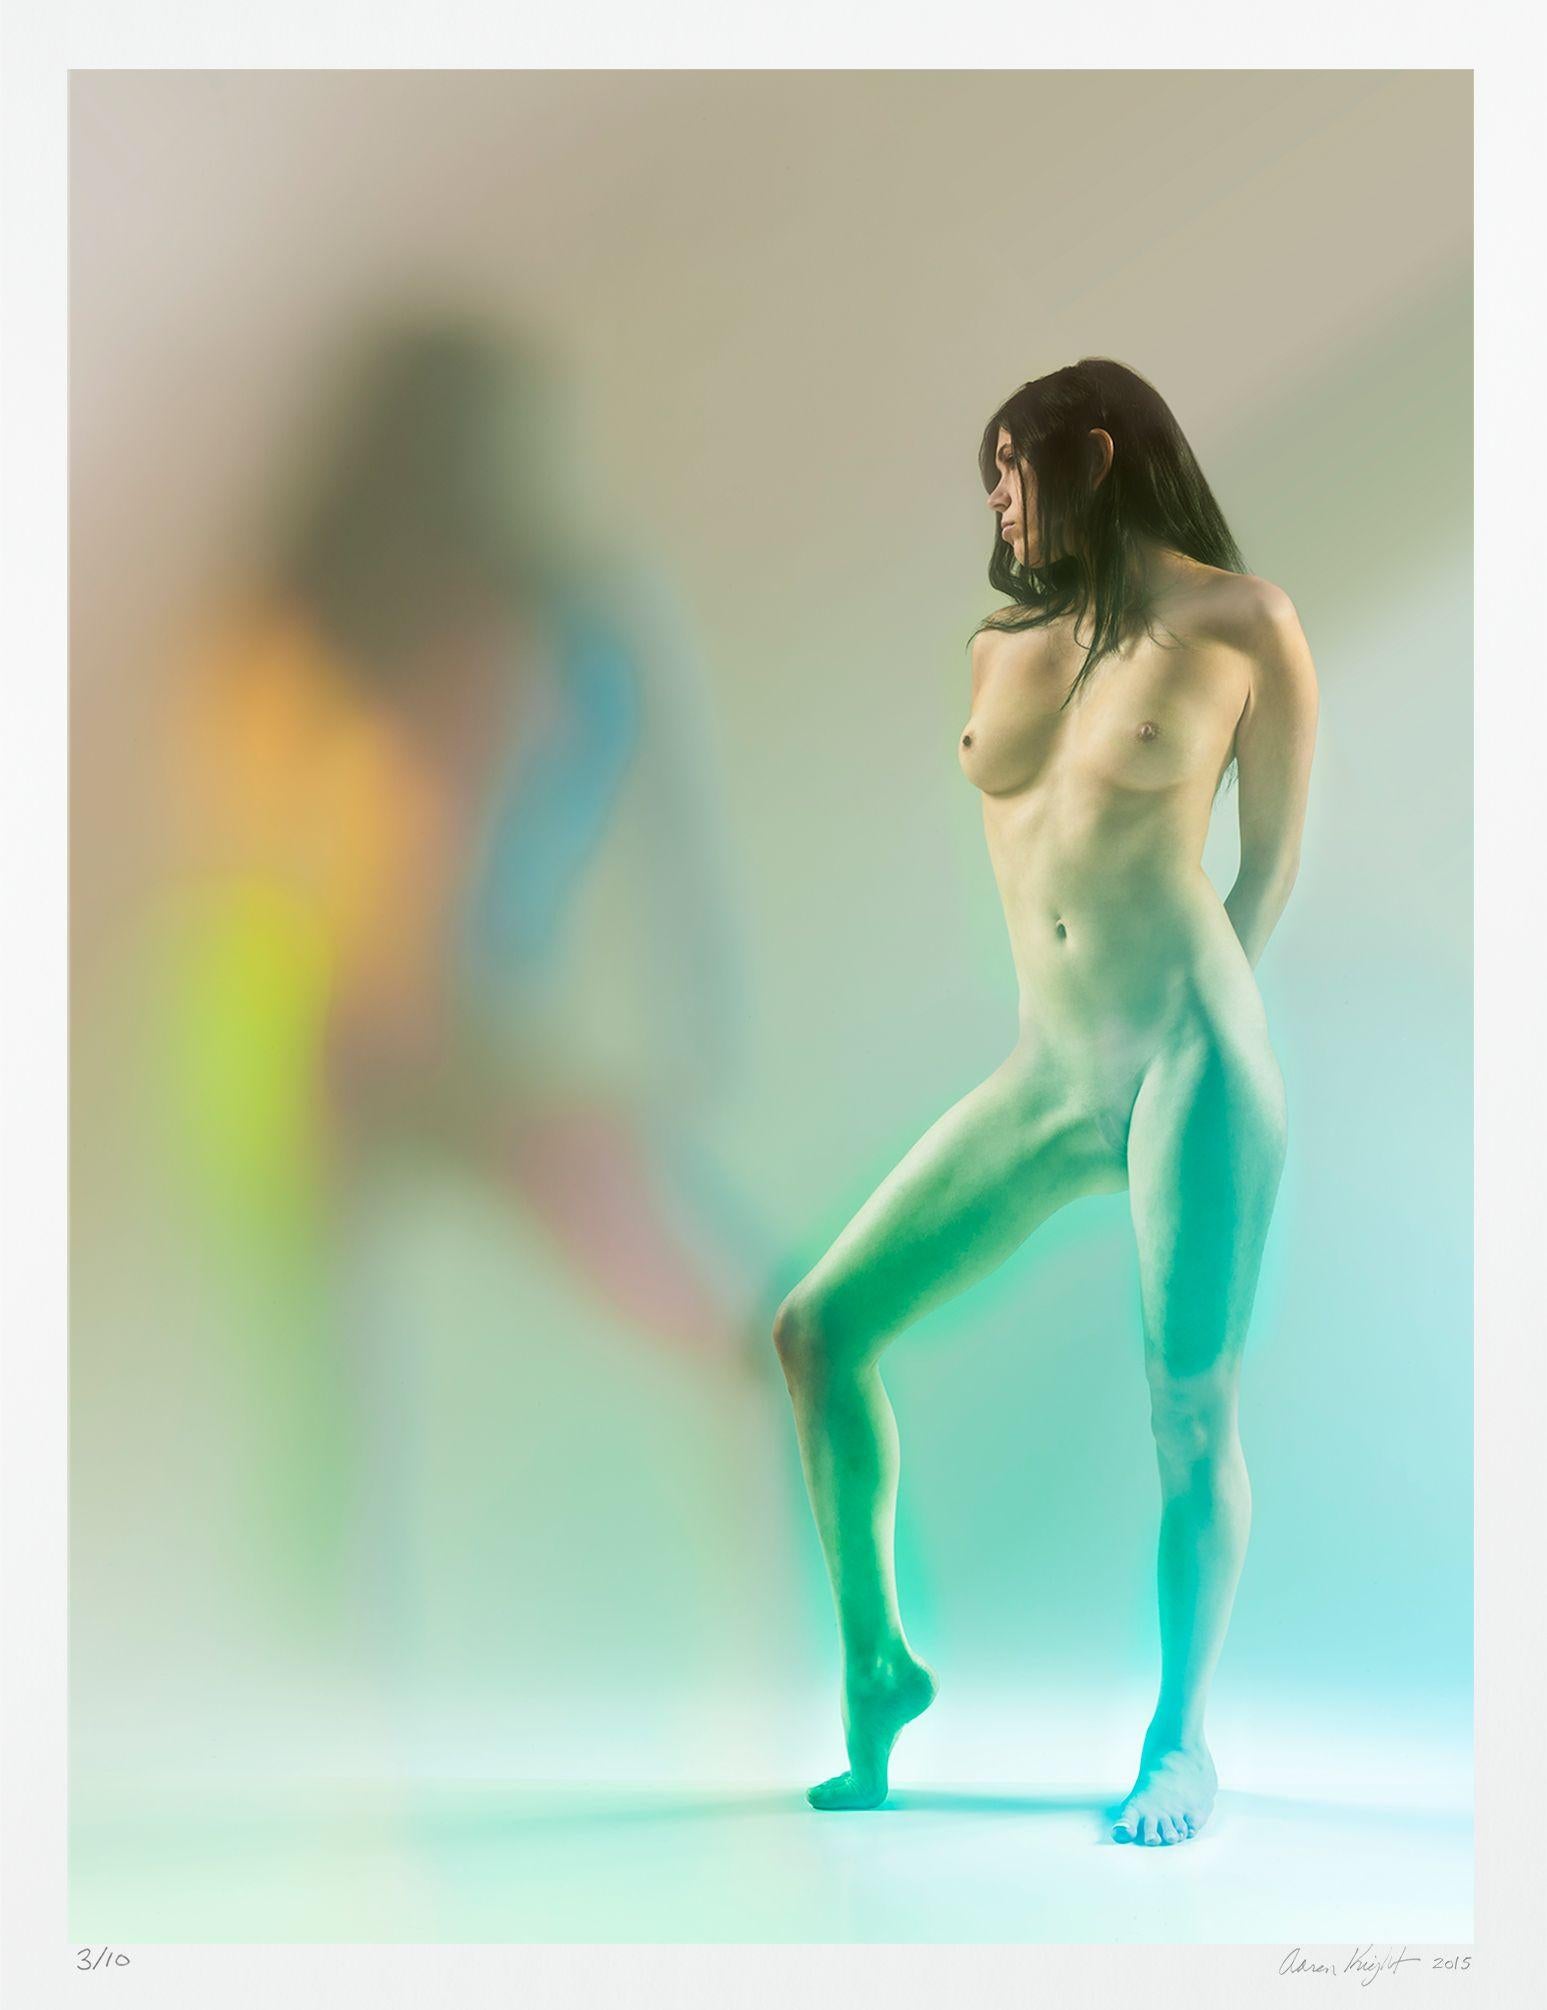 Aaron Knight Color Photograph - Tess, Ghostly 2/10, Photograph, Archival Ink Jet